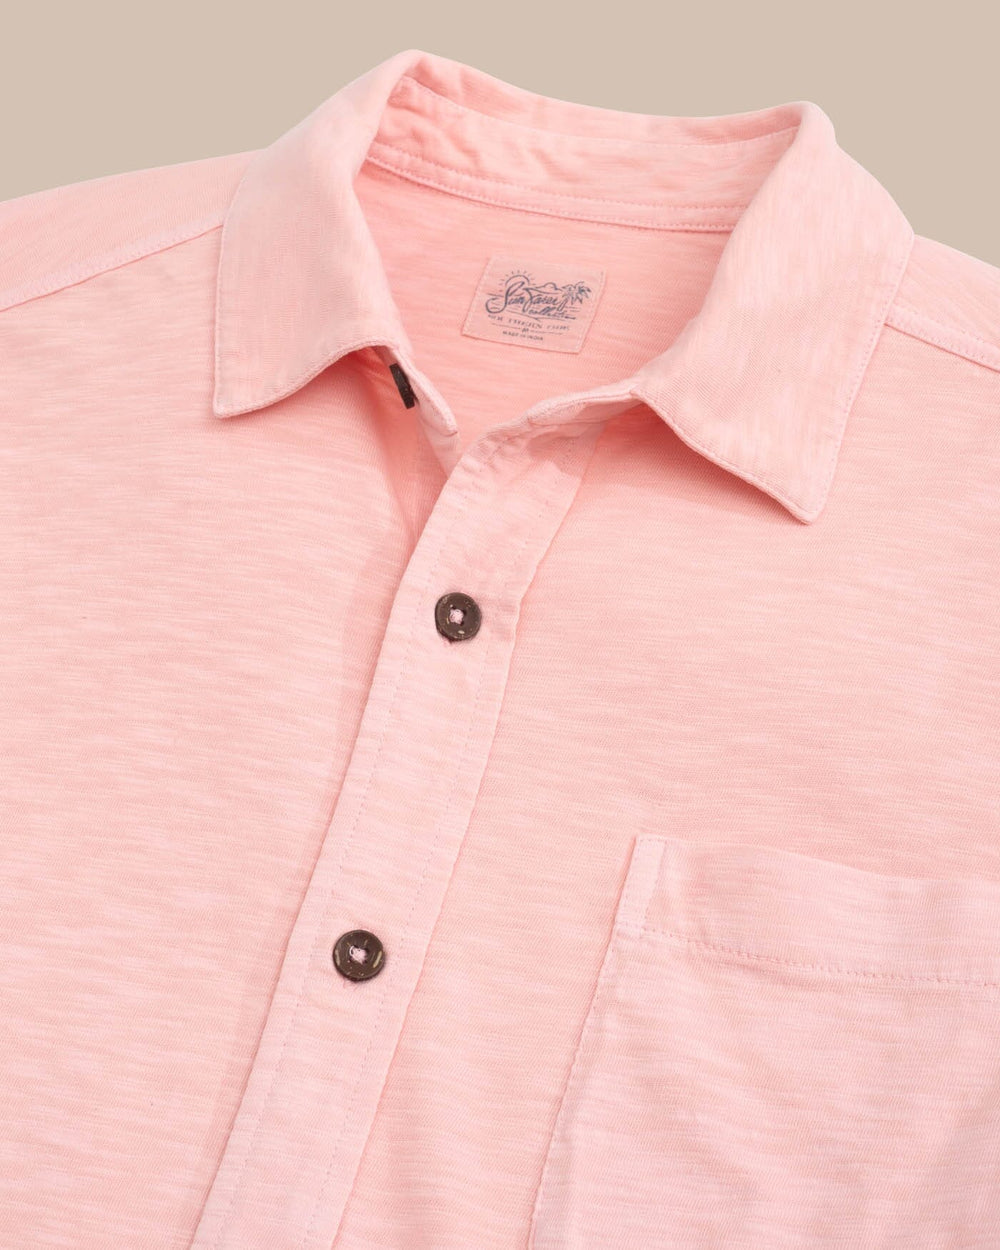 The detail view of the Southern Tide Beachcast Solid Knit Short Sleeve Sport Shirt by Southern Tide - Pale Rosette Pink